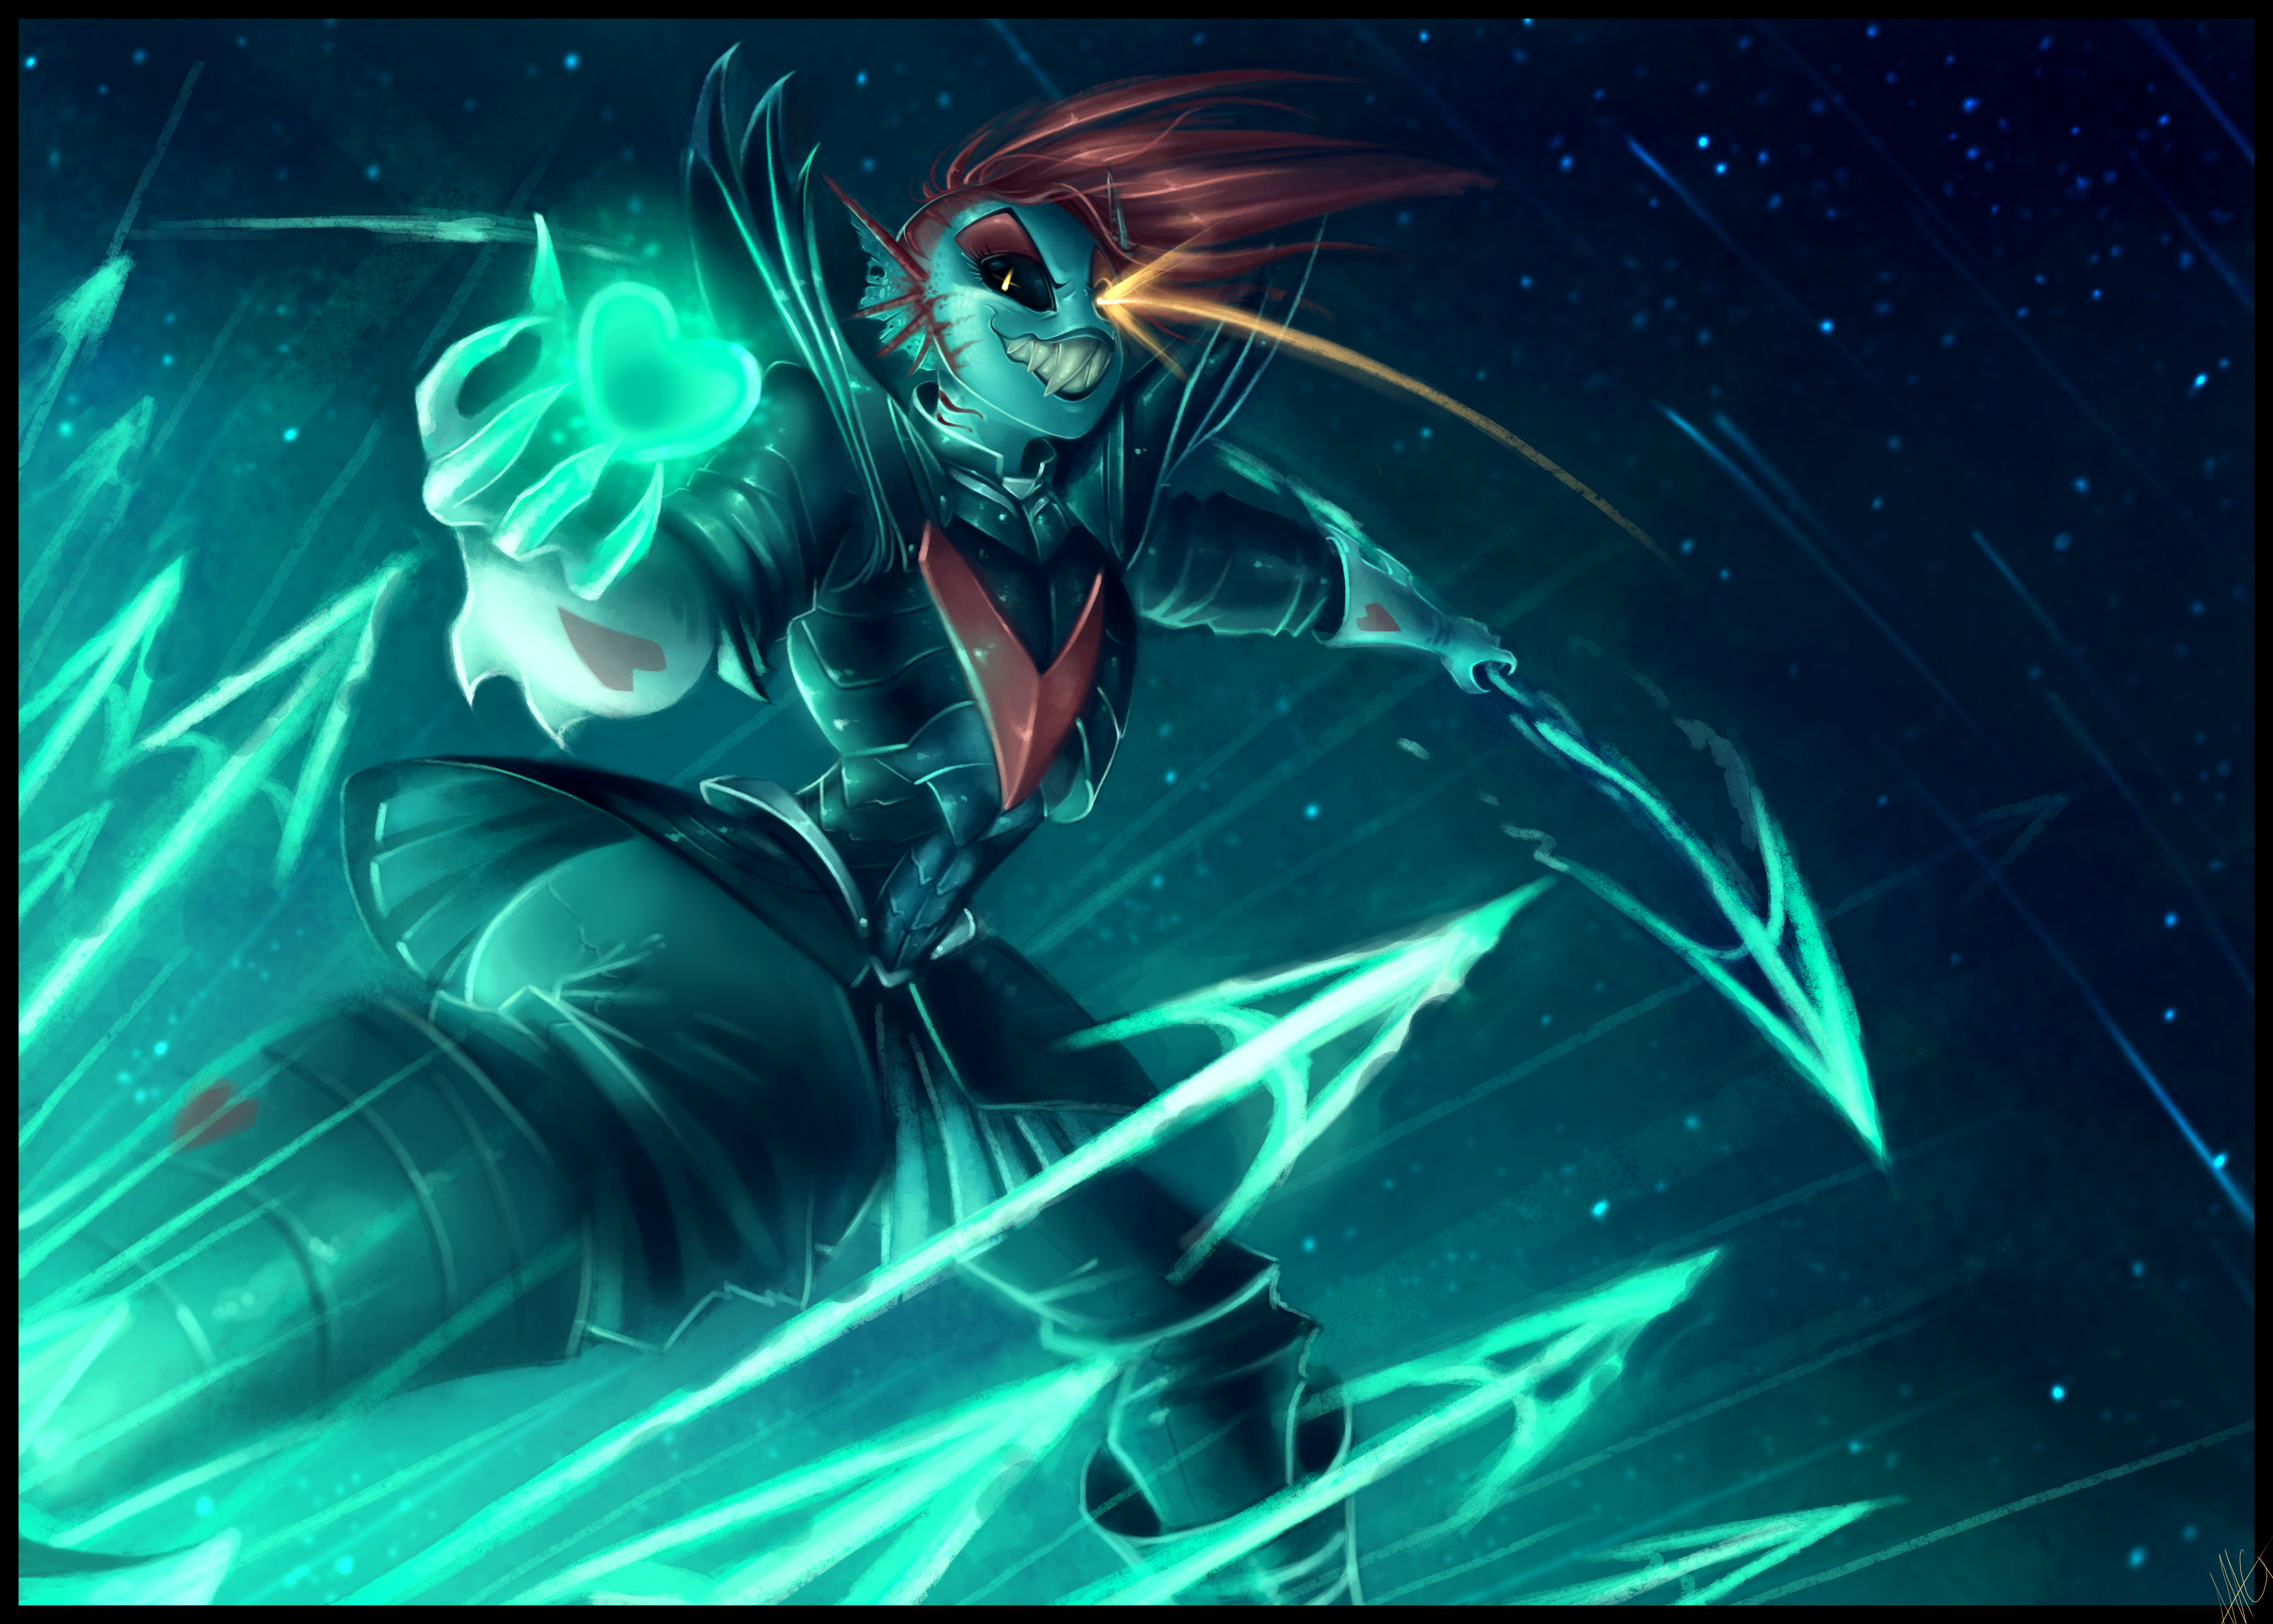 Undyne Undertale Undyne The Undying Undertale Undertale Red Hair Heart Armor Boots Teeth Smile Weapo 7833x5596